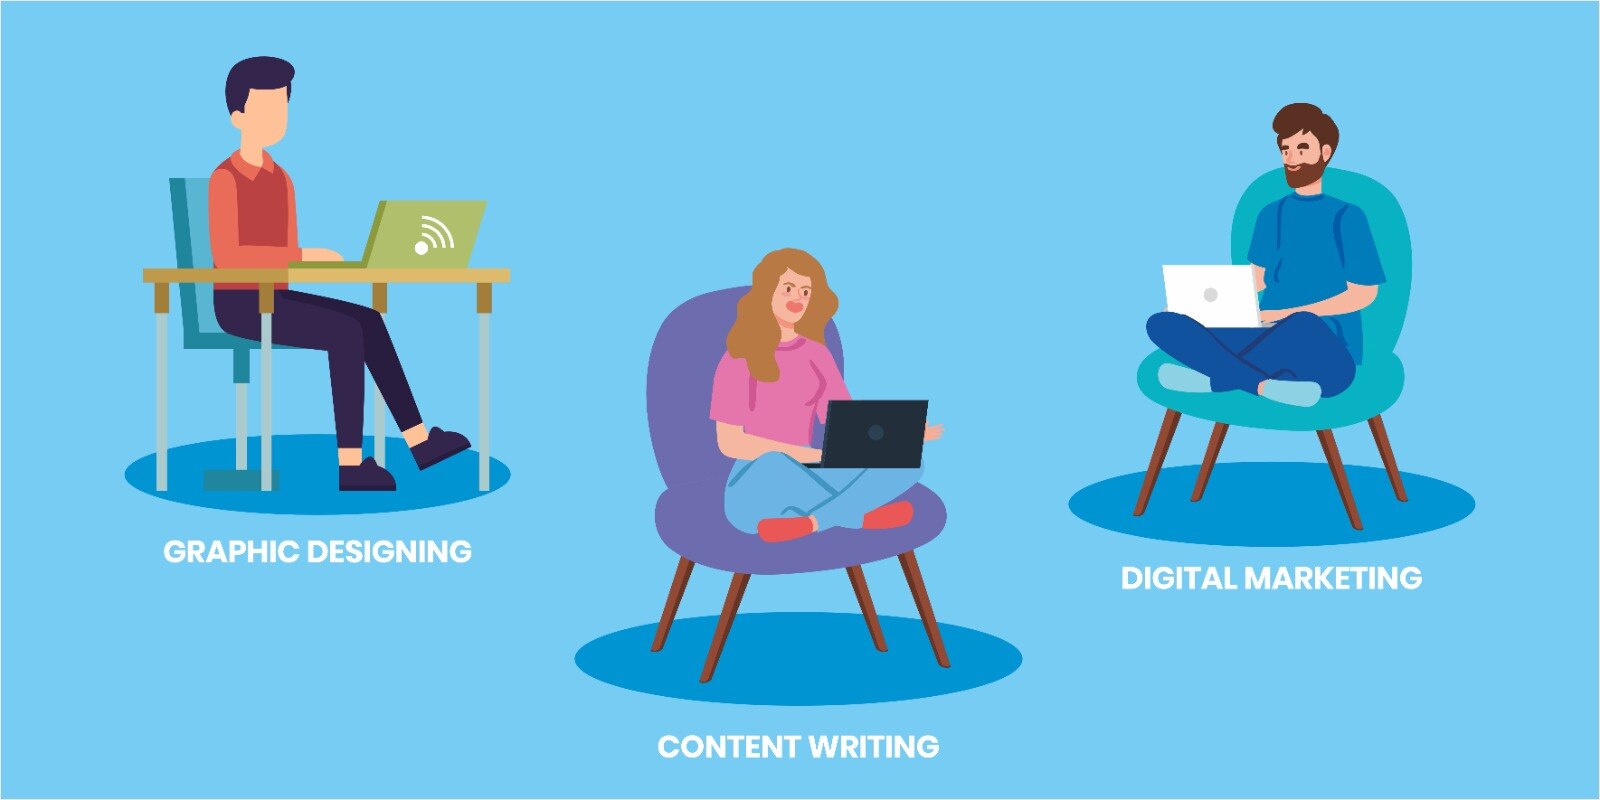 This image depicts various scenarios in which three different people engage in different freelancing activities to diversify their income streams.